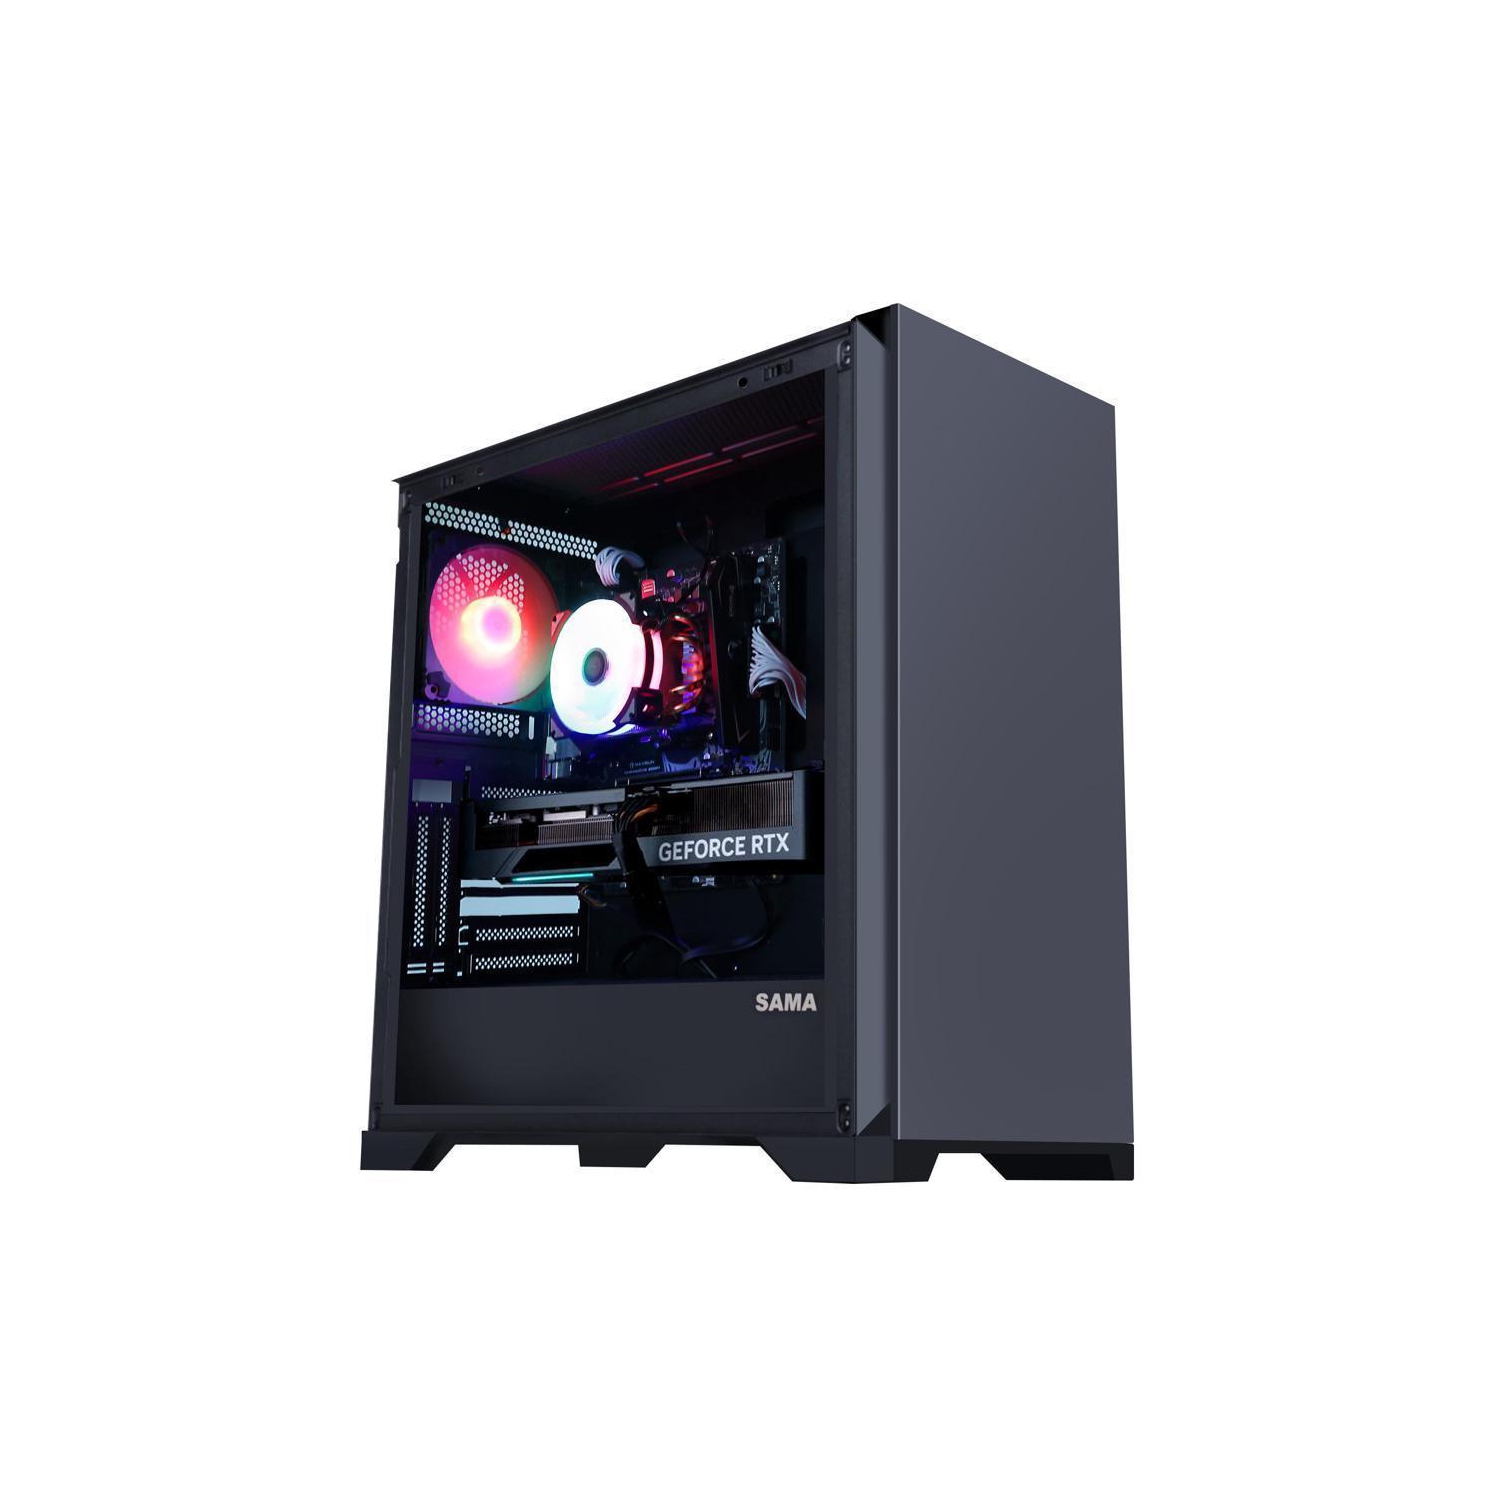 Hoengager Ares Gaming - Intel Core i5-12600K 10-Core 3.7GHz- RX 6750 XT 12G - 32GB DDR4 3200MHz - 500GB M.2 + 1TB 2.5'' SATA SSD- WIFI -RGB Fans - Windows 11 Pro Computer